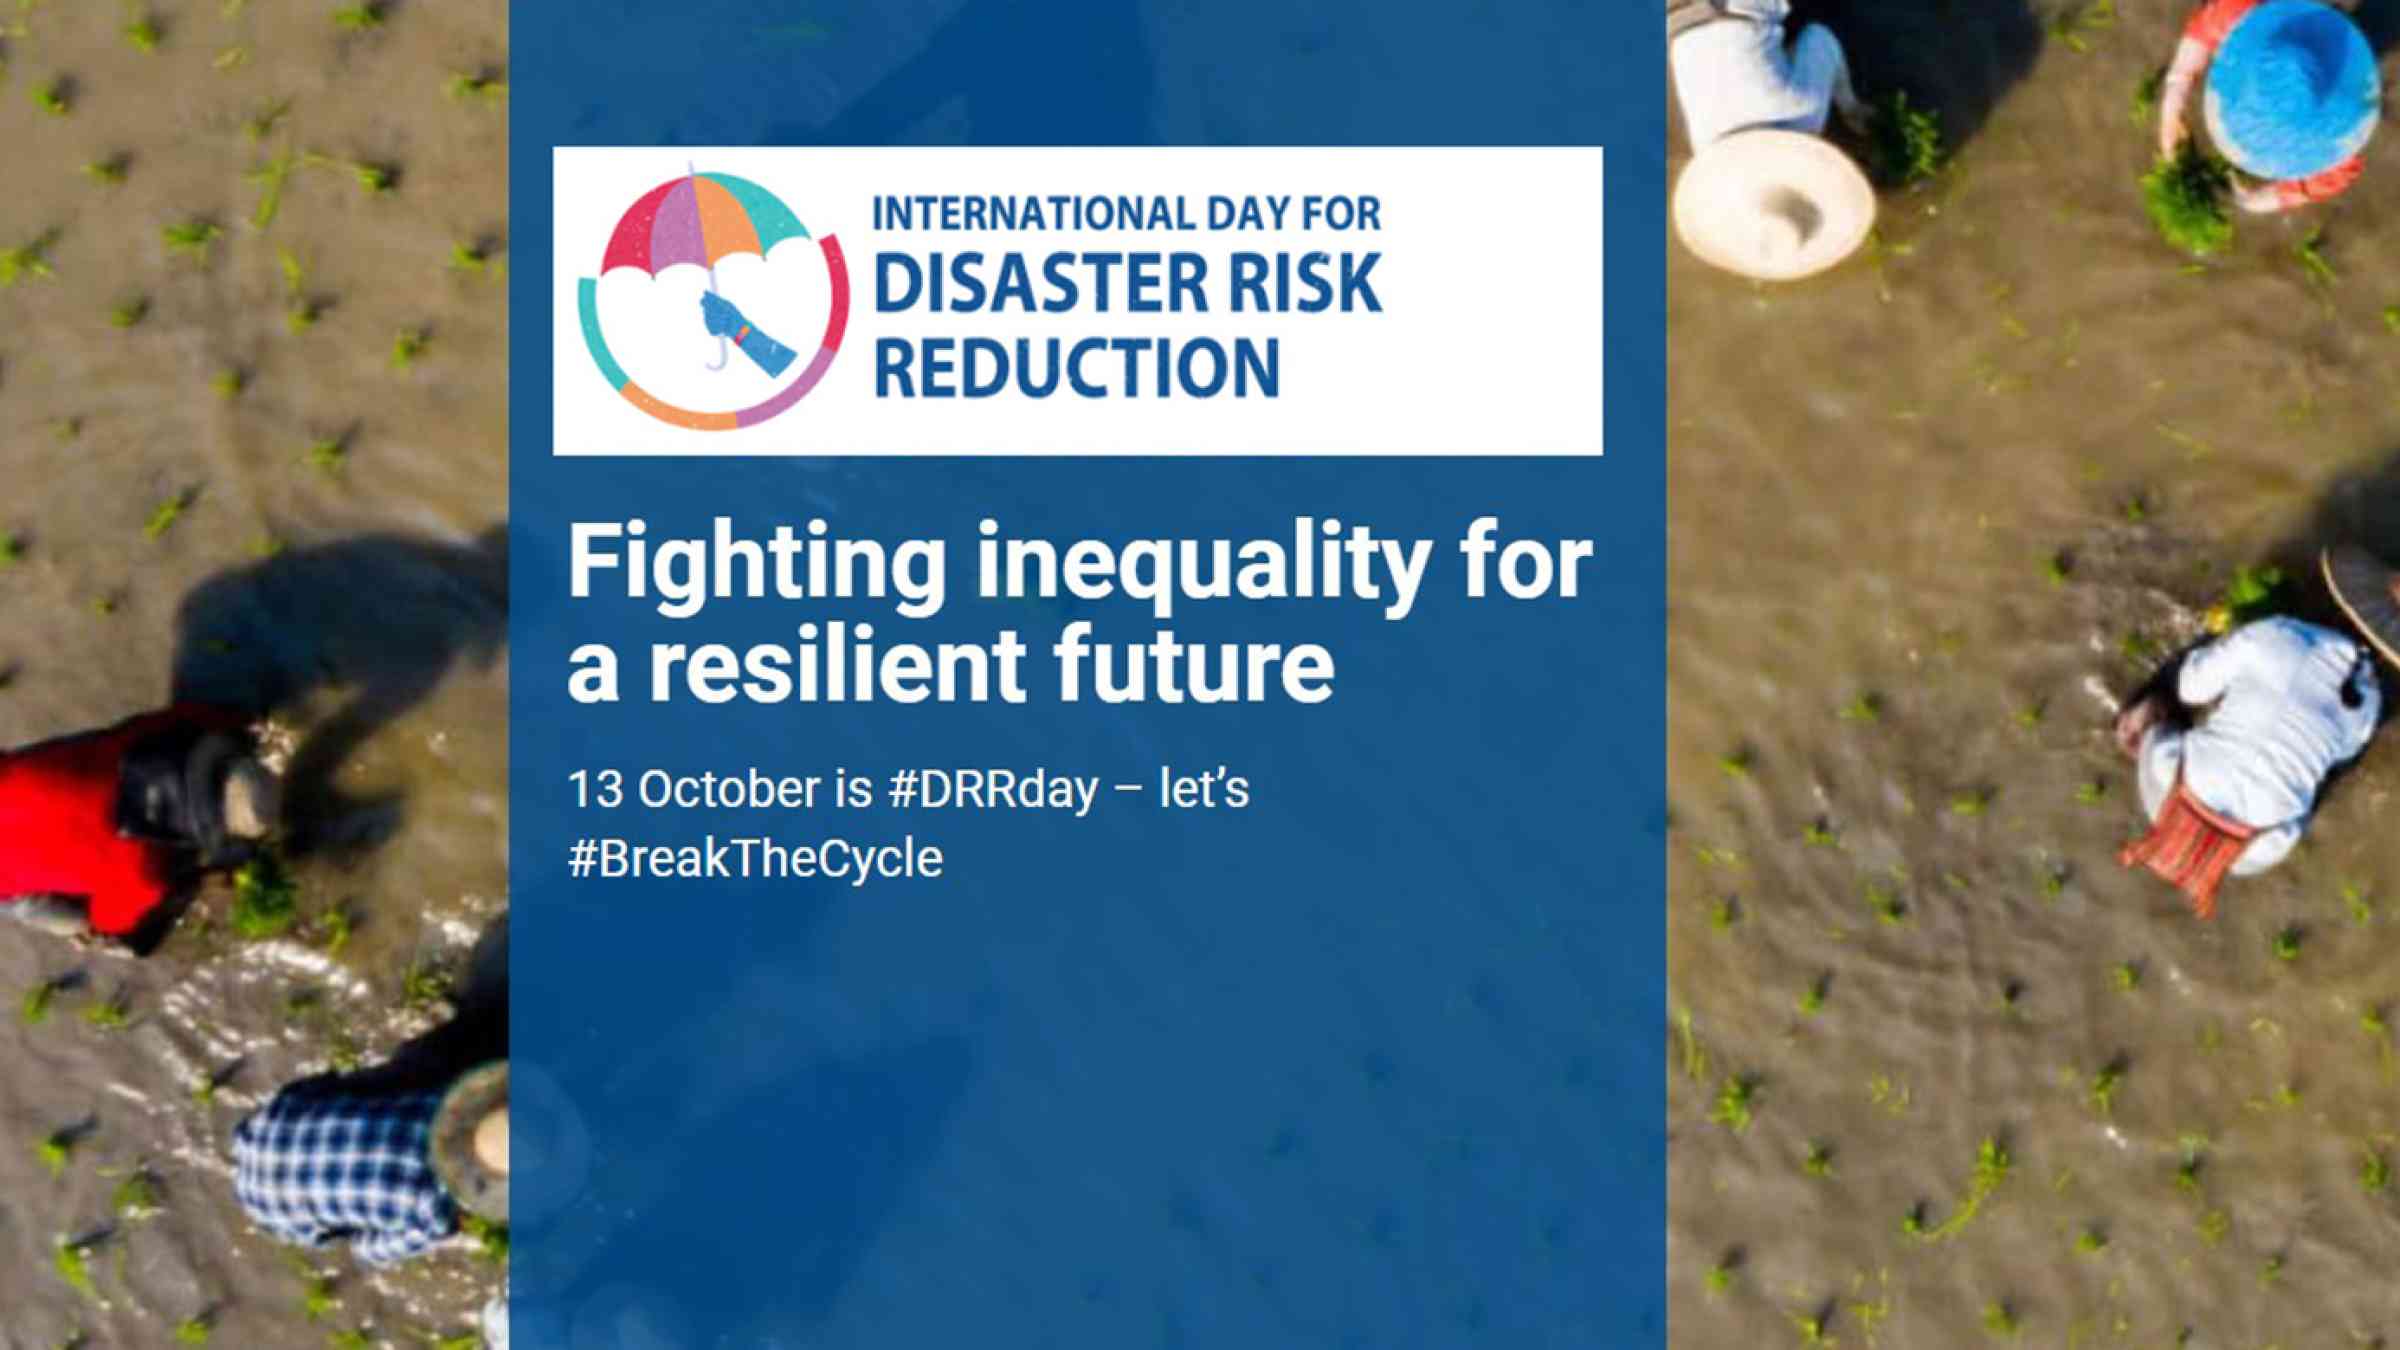 IDDRR - Fighting inequality for a resilient future